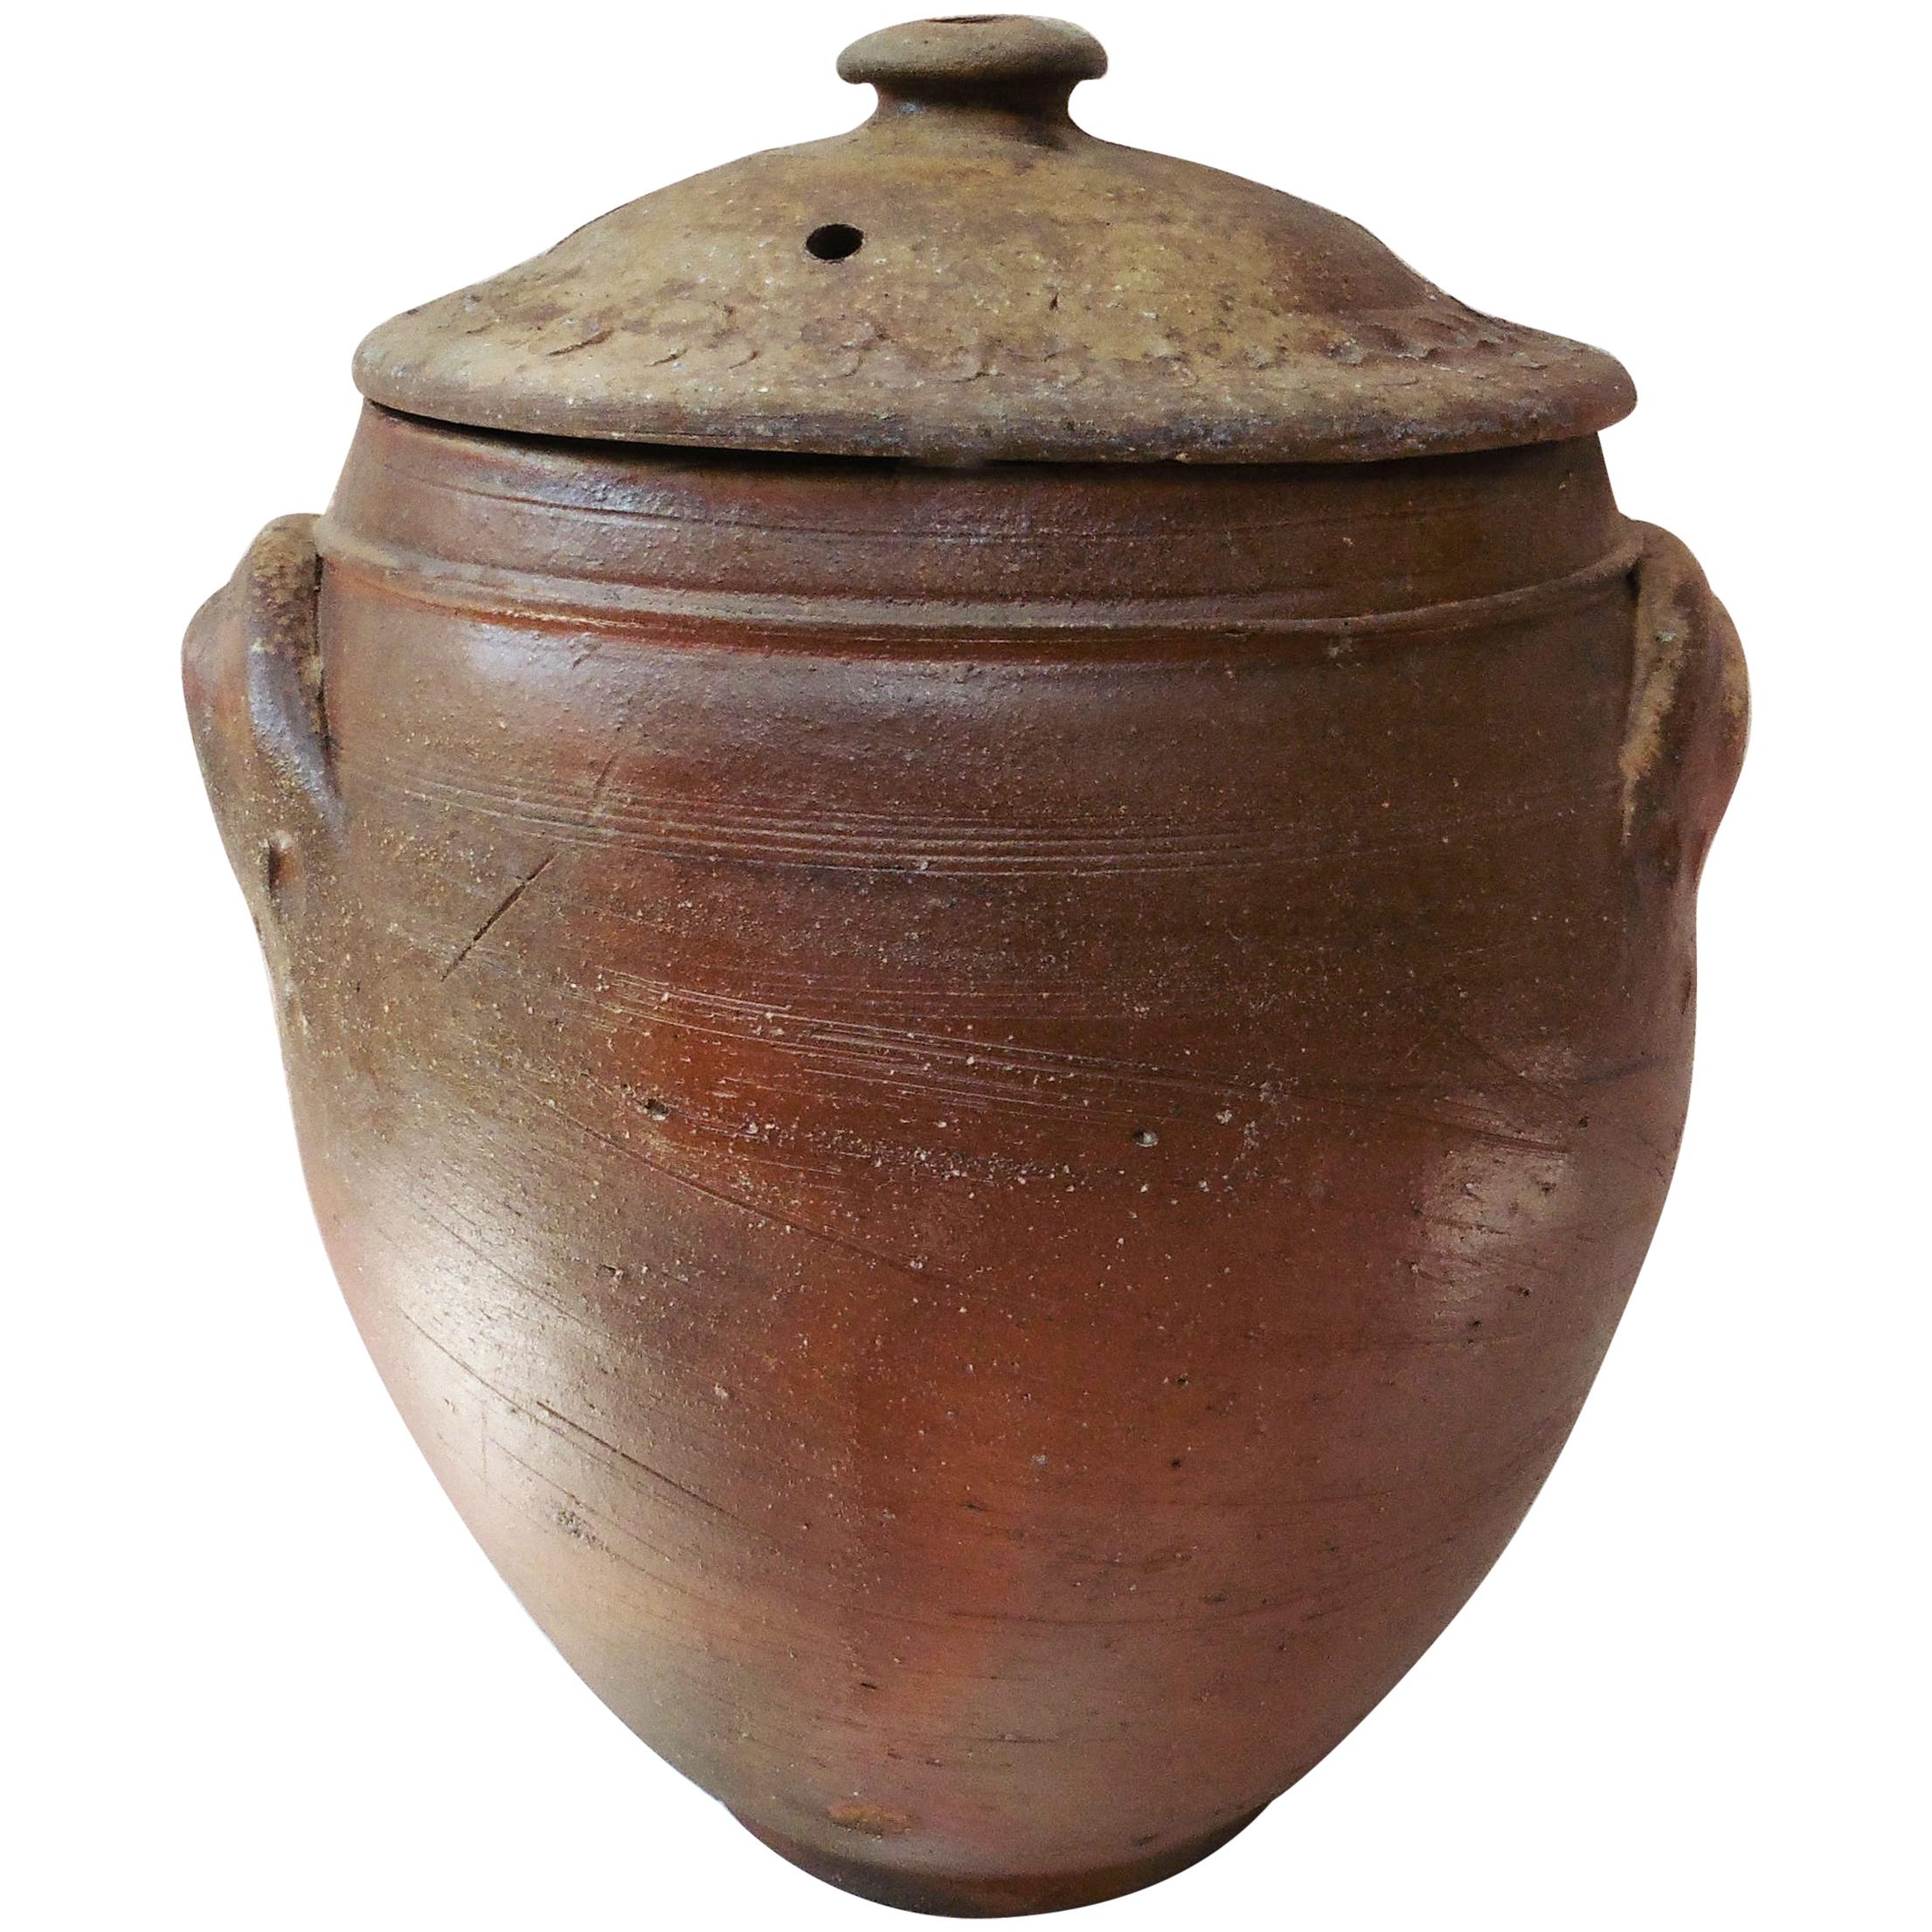 Large French Pottery Salting Jar from Normandy